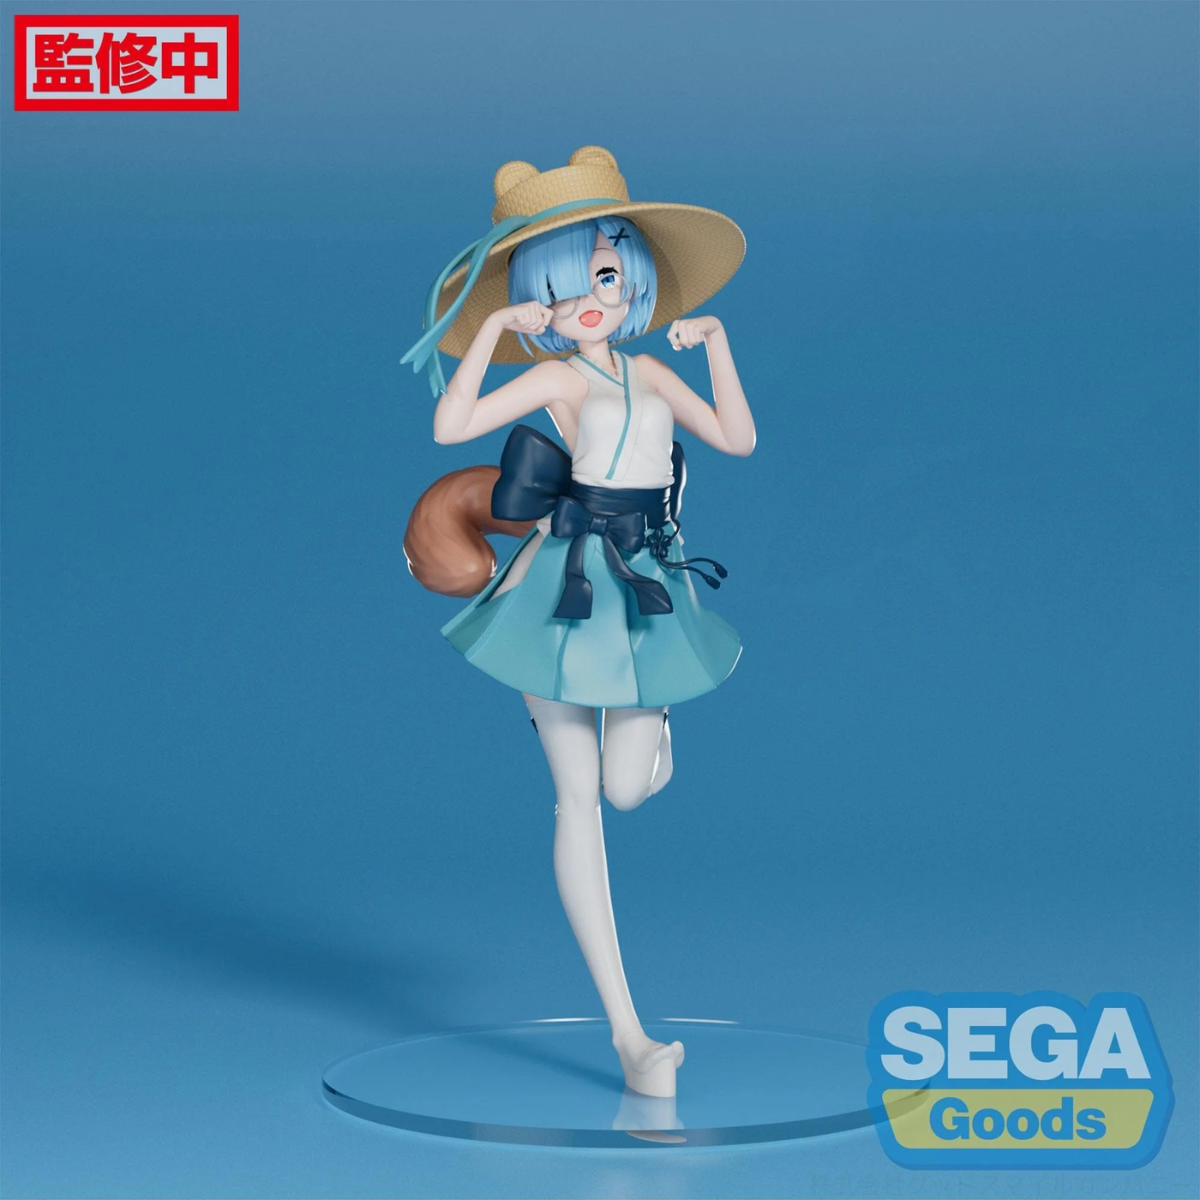 Re:Zero Starting Life In Another World Luminasta "Rem" (Pom Poko Racoon Dog)-Sega-Ace Cards & Collectibles